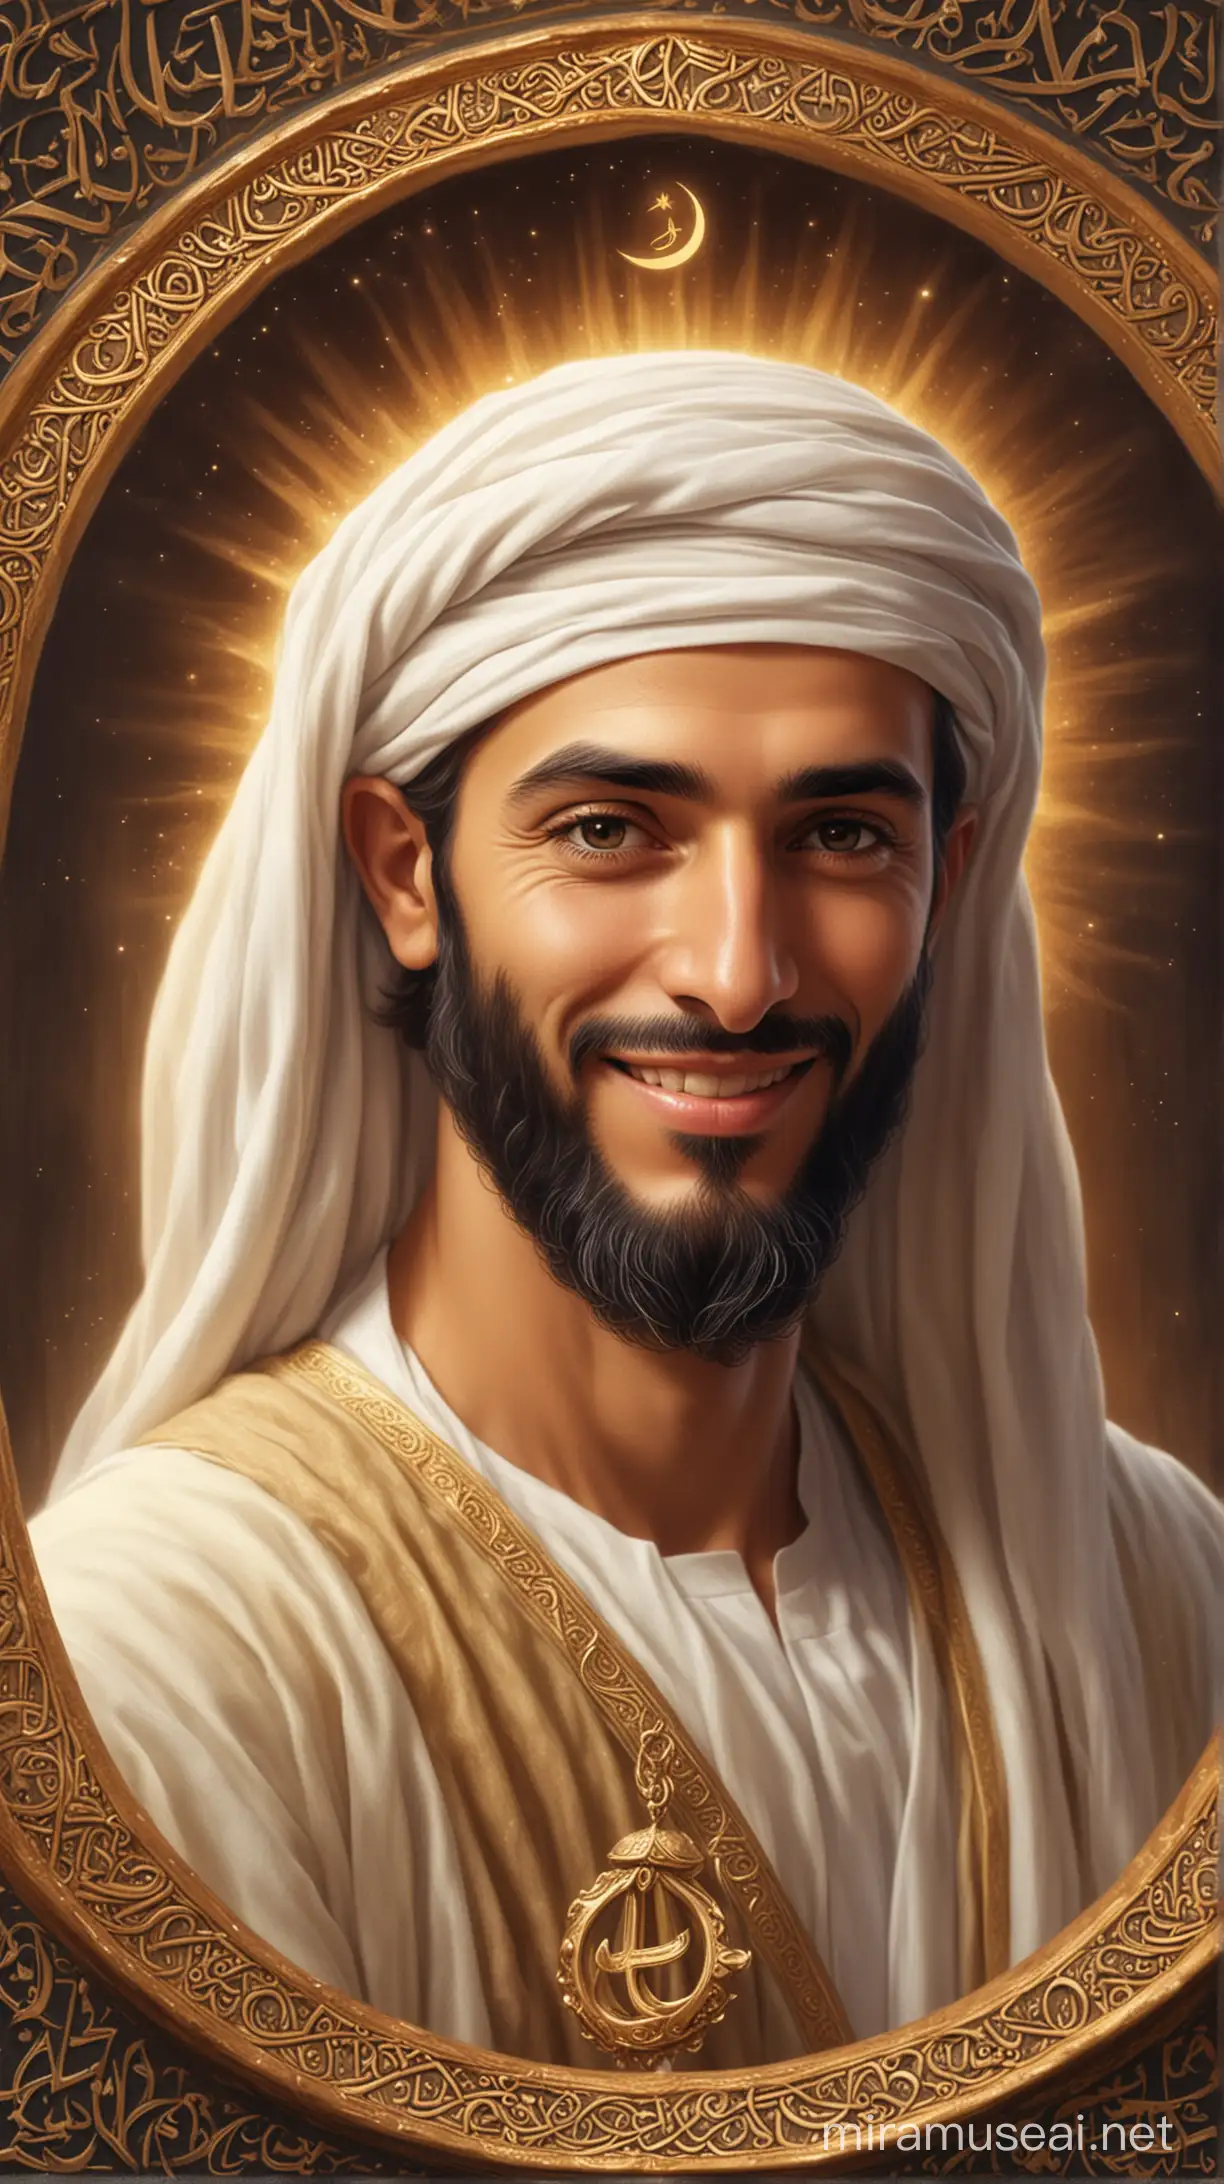 Prophet Muhammad Peace Be Upon Him Portrait Warmth and Compassion